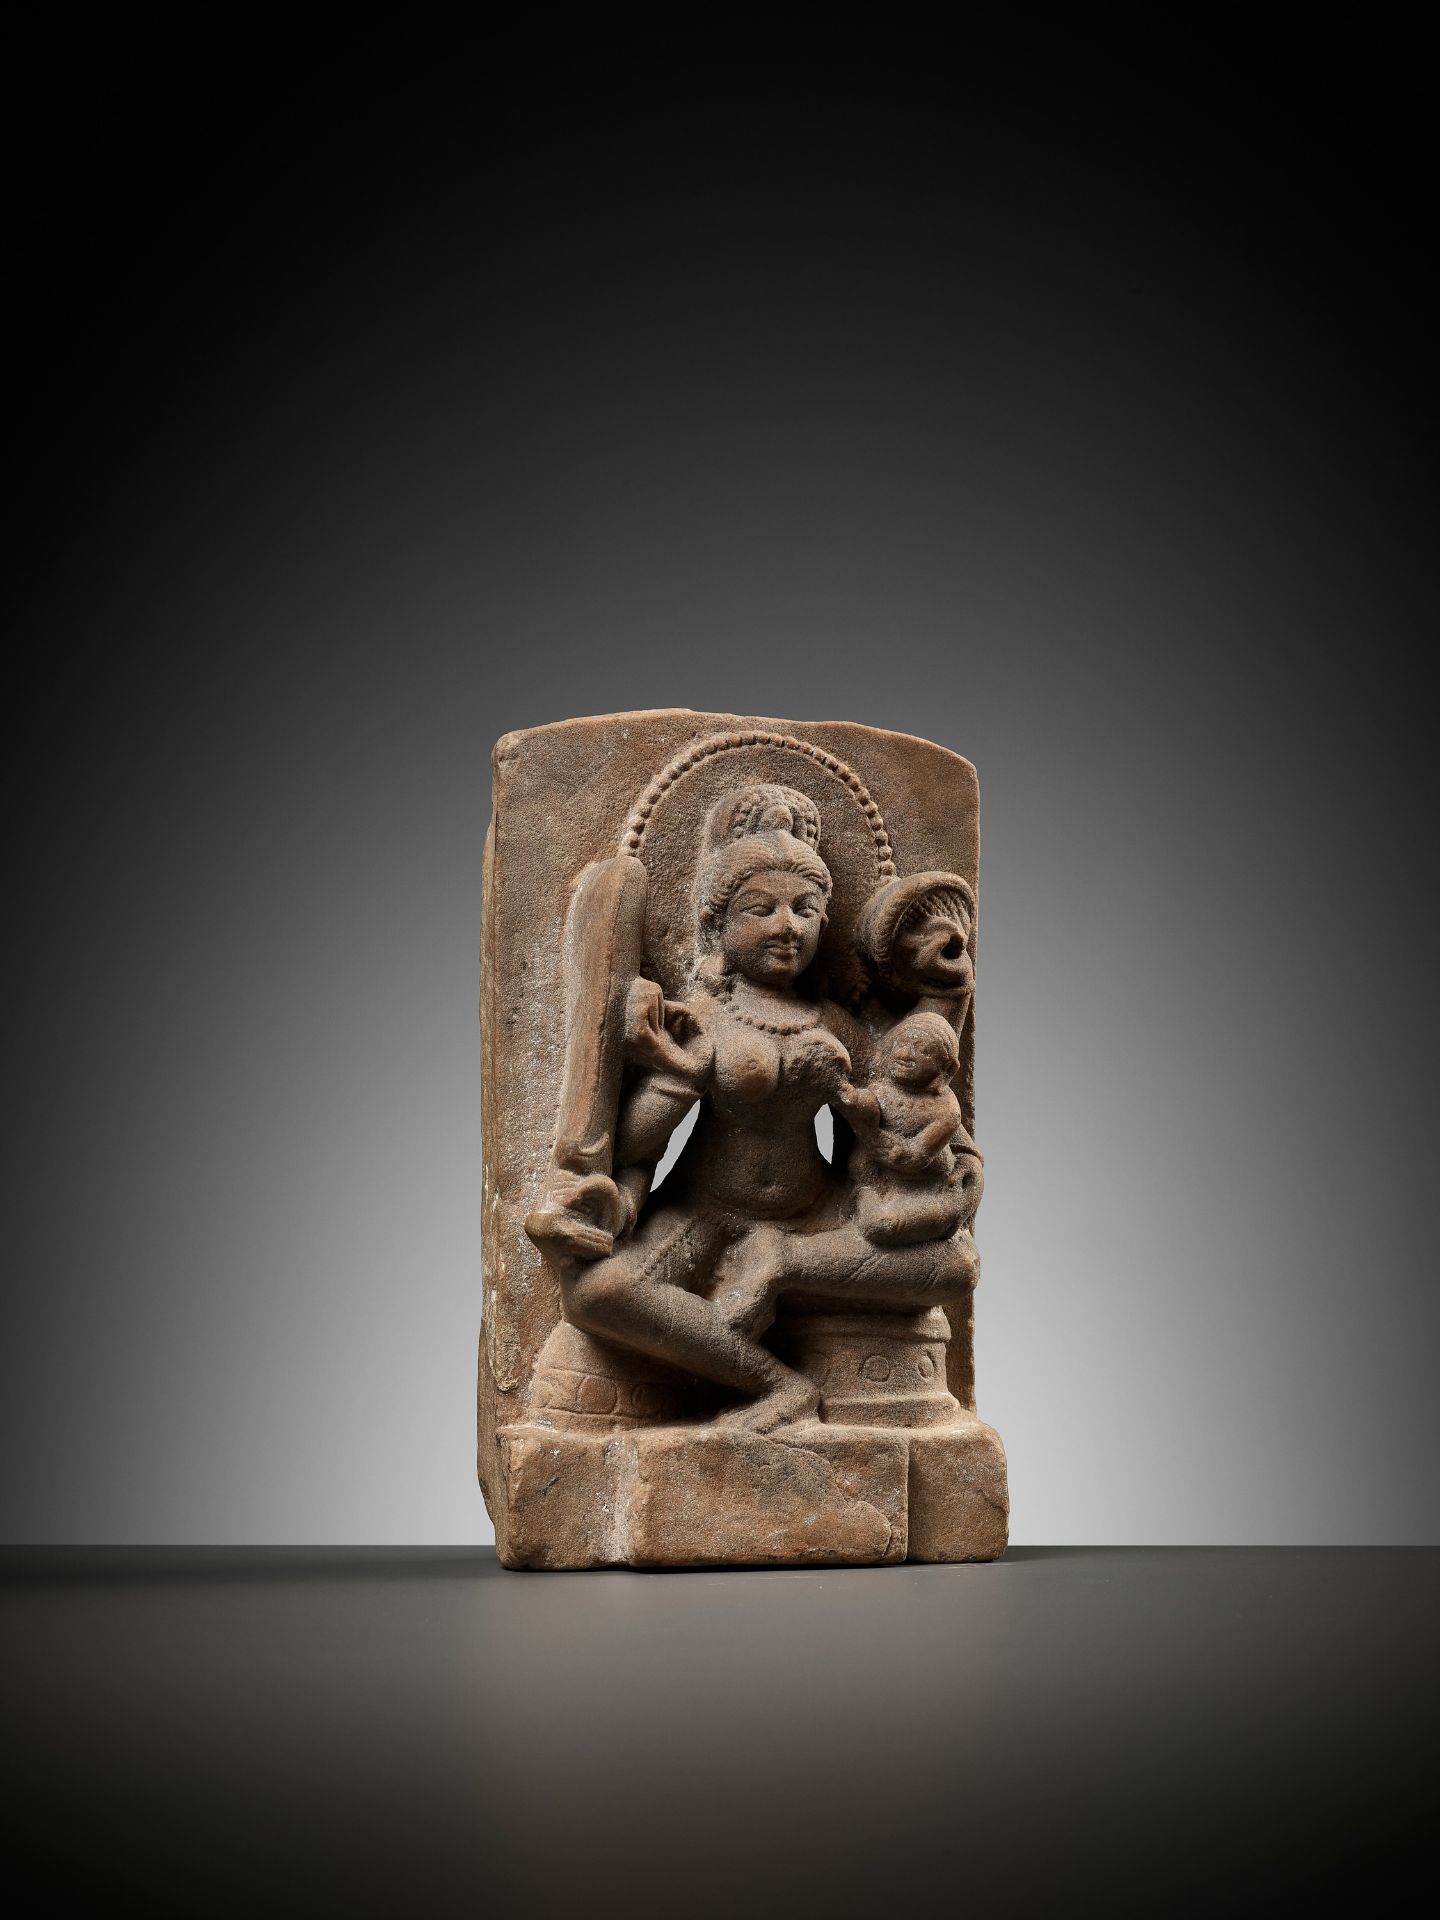 A RARE SANDSTONE MINATURE STELE FIGURE OF A MOTHER GODDESS WITH CHILD - Image 9 of 10